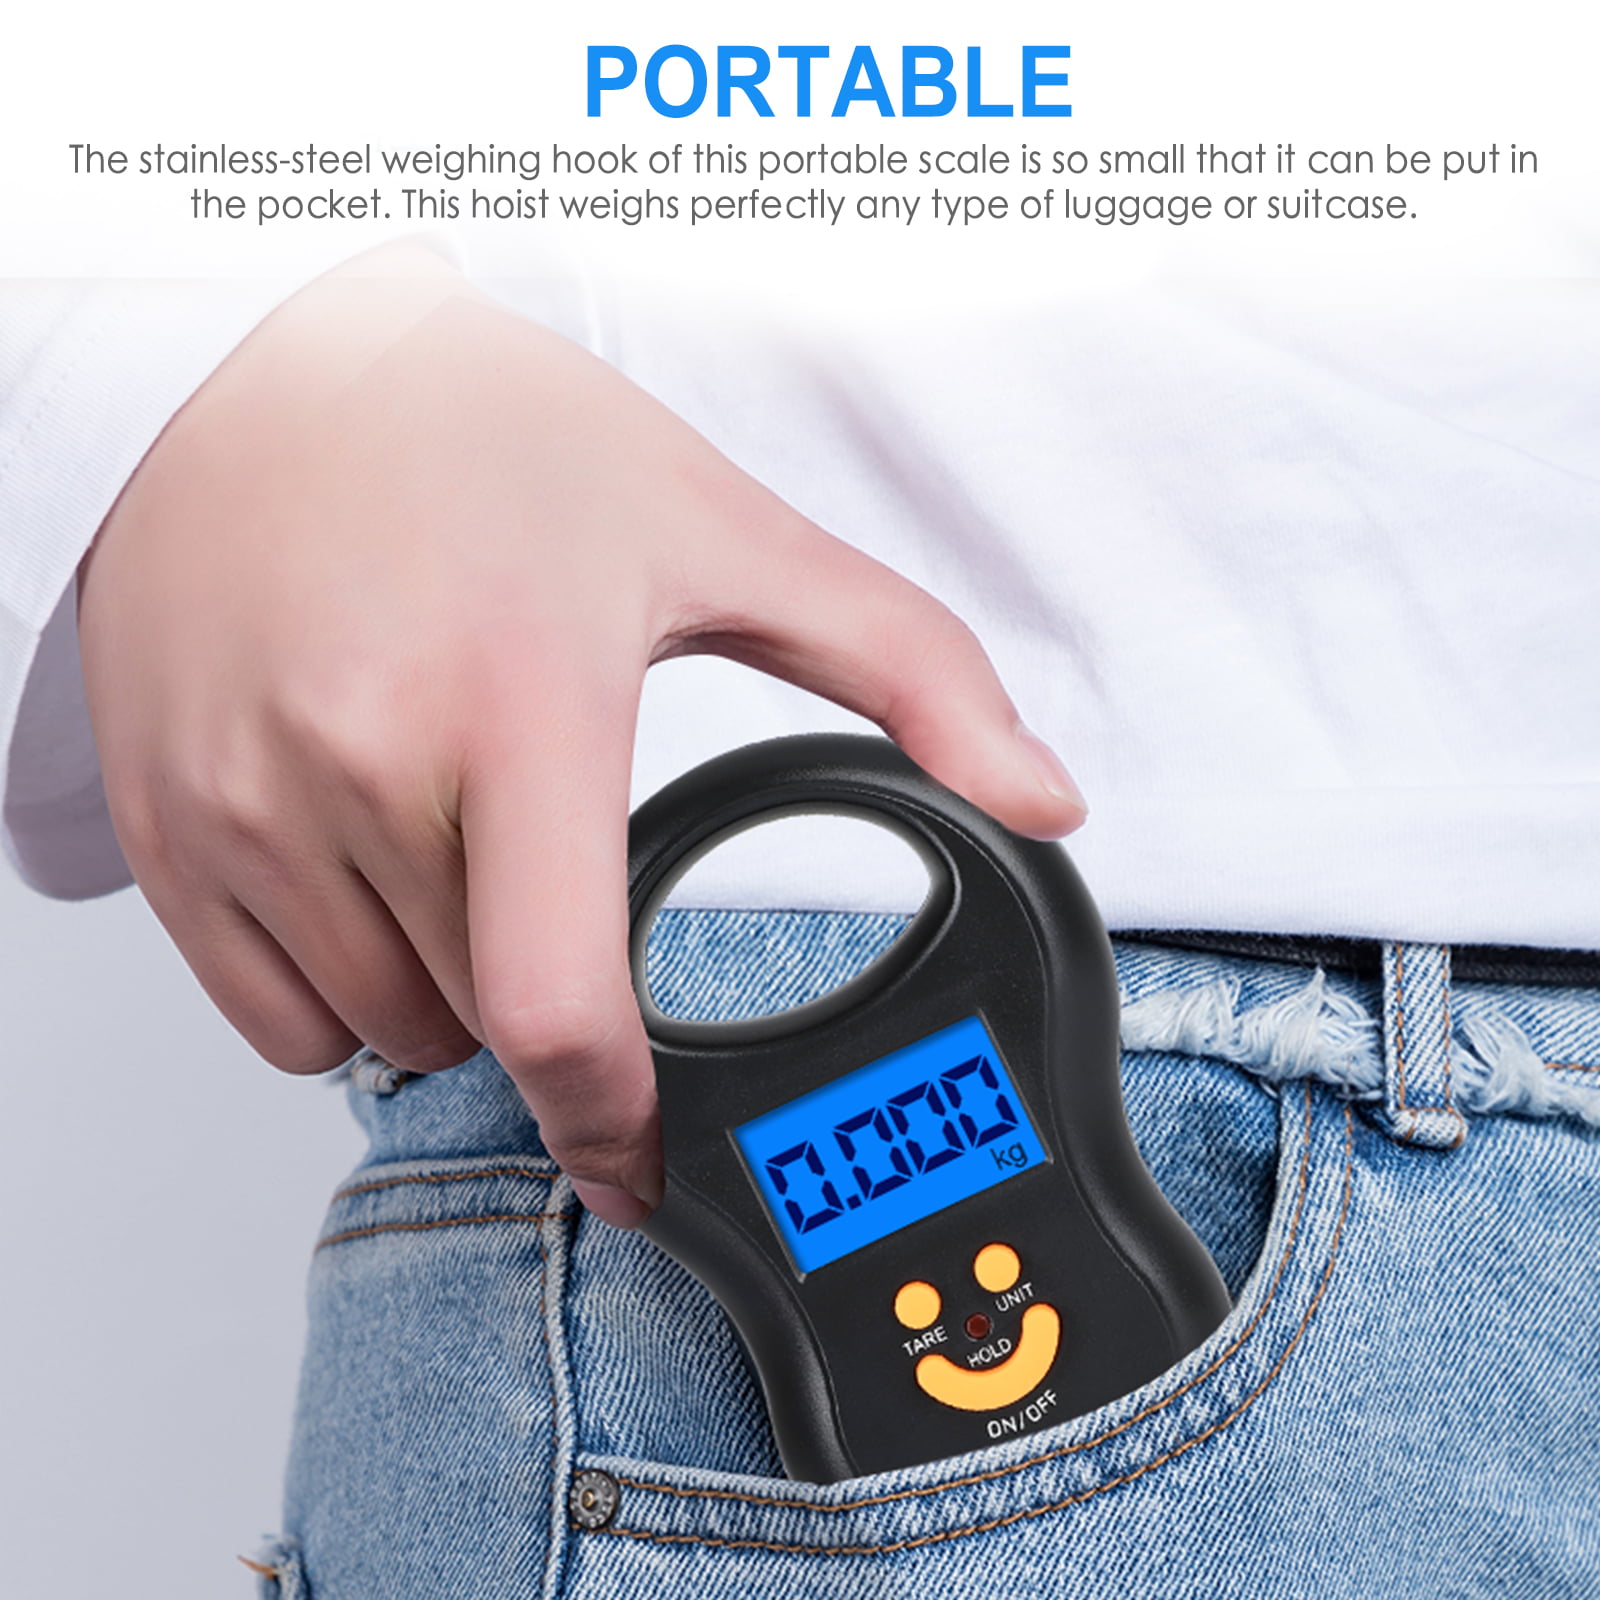 5 Core Portable Fish Scale Handheld Electronic Digital Hanging Weight  110lb/50kg on eBid United States